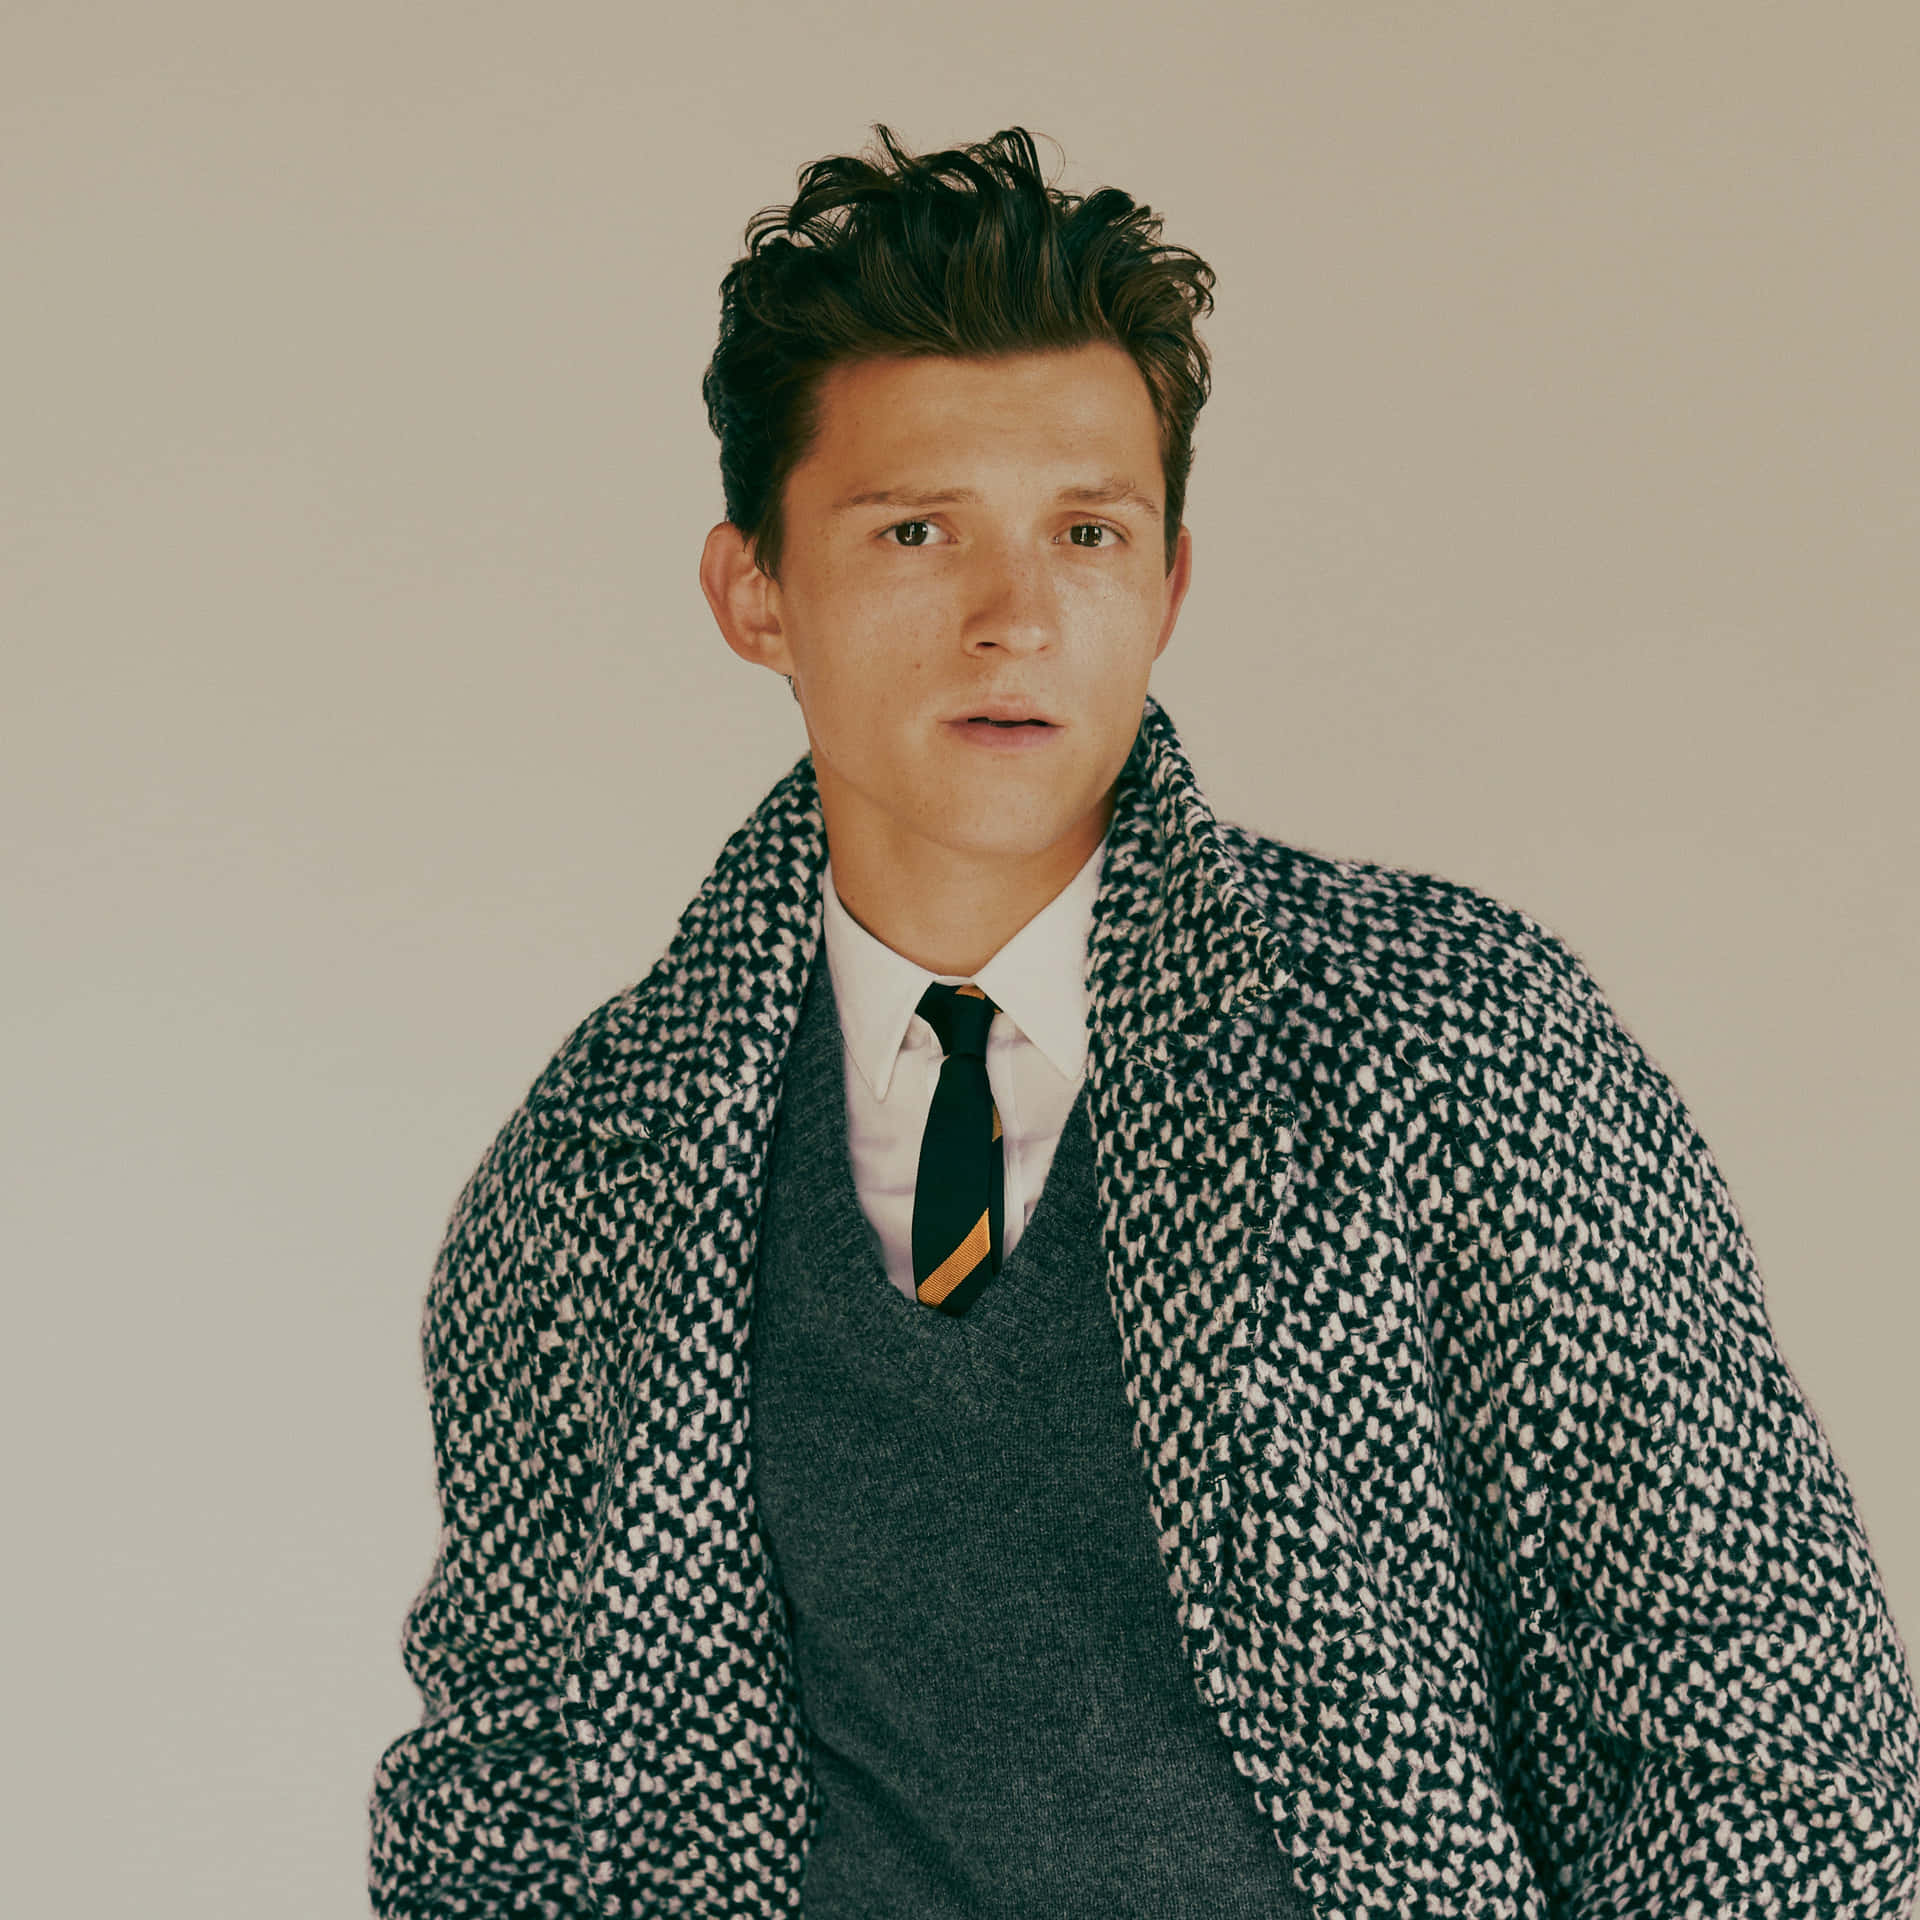 Get dewy Tom Holland vibes with this dreamy aesthetic Wallpaper